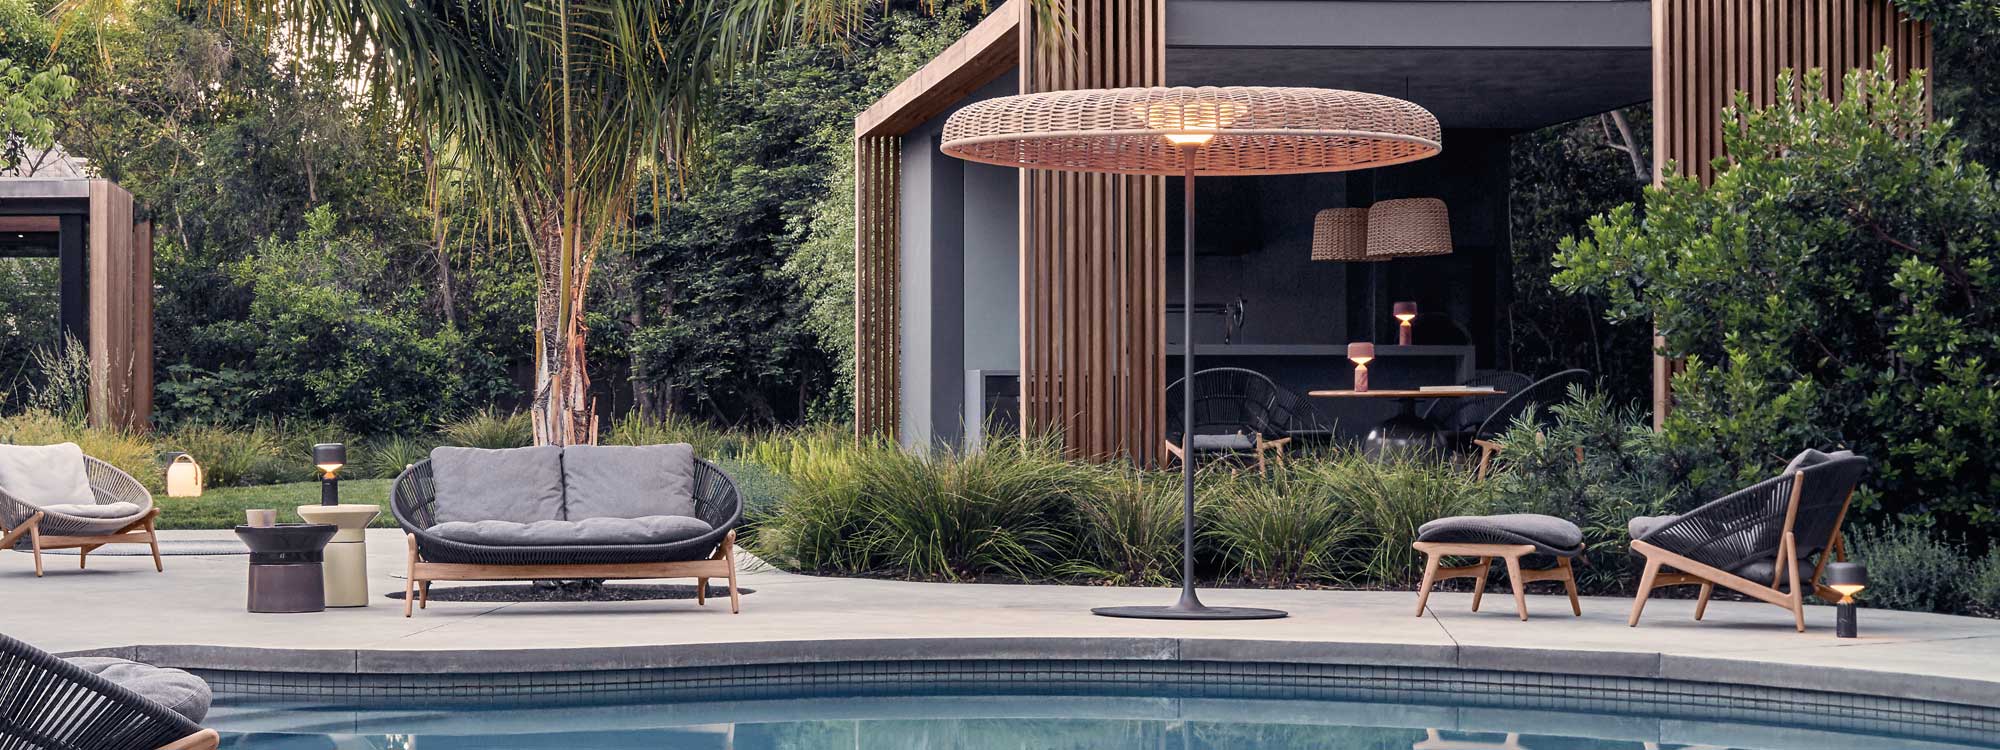 Image of illuminated Ambient Sol parasol lantern on poolside next to Bora lounge sofa by Gloster